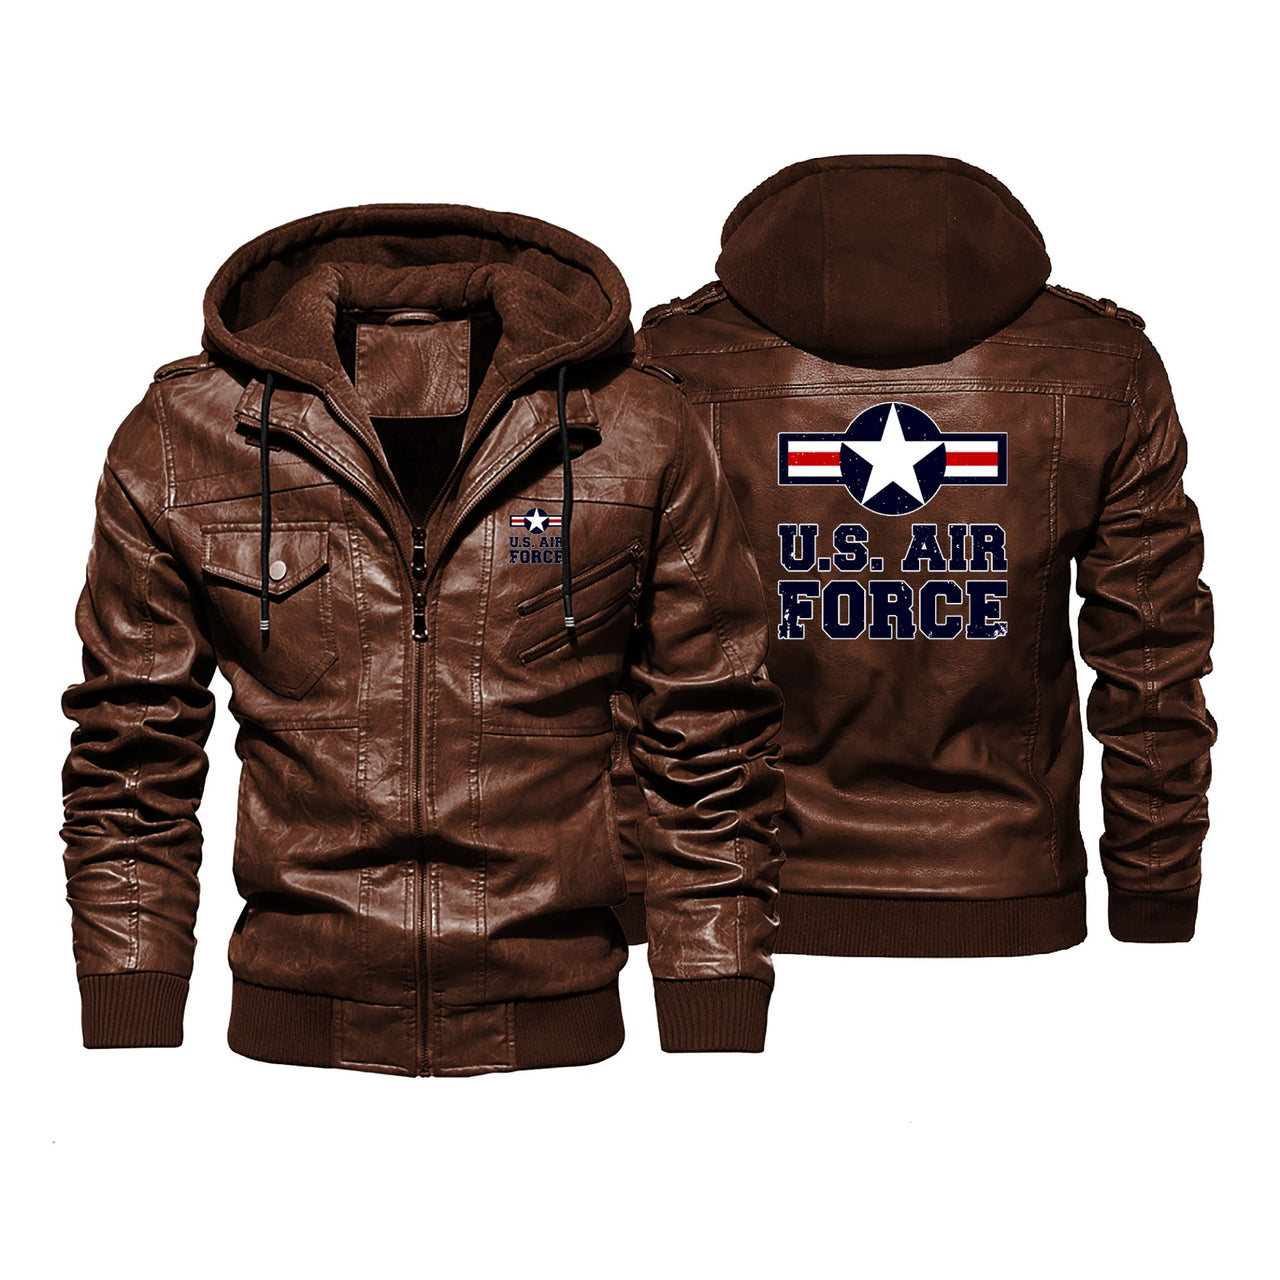 US Air Force Designed Hooded Leather Jackets